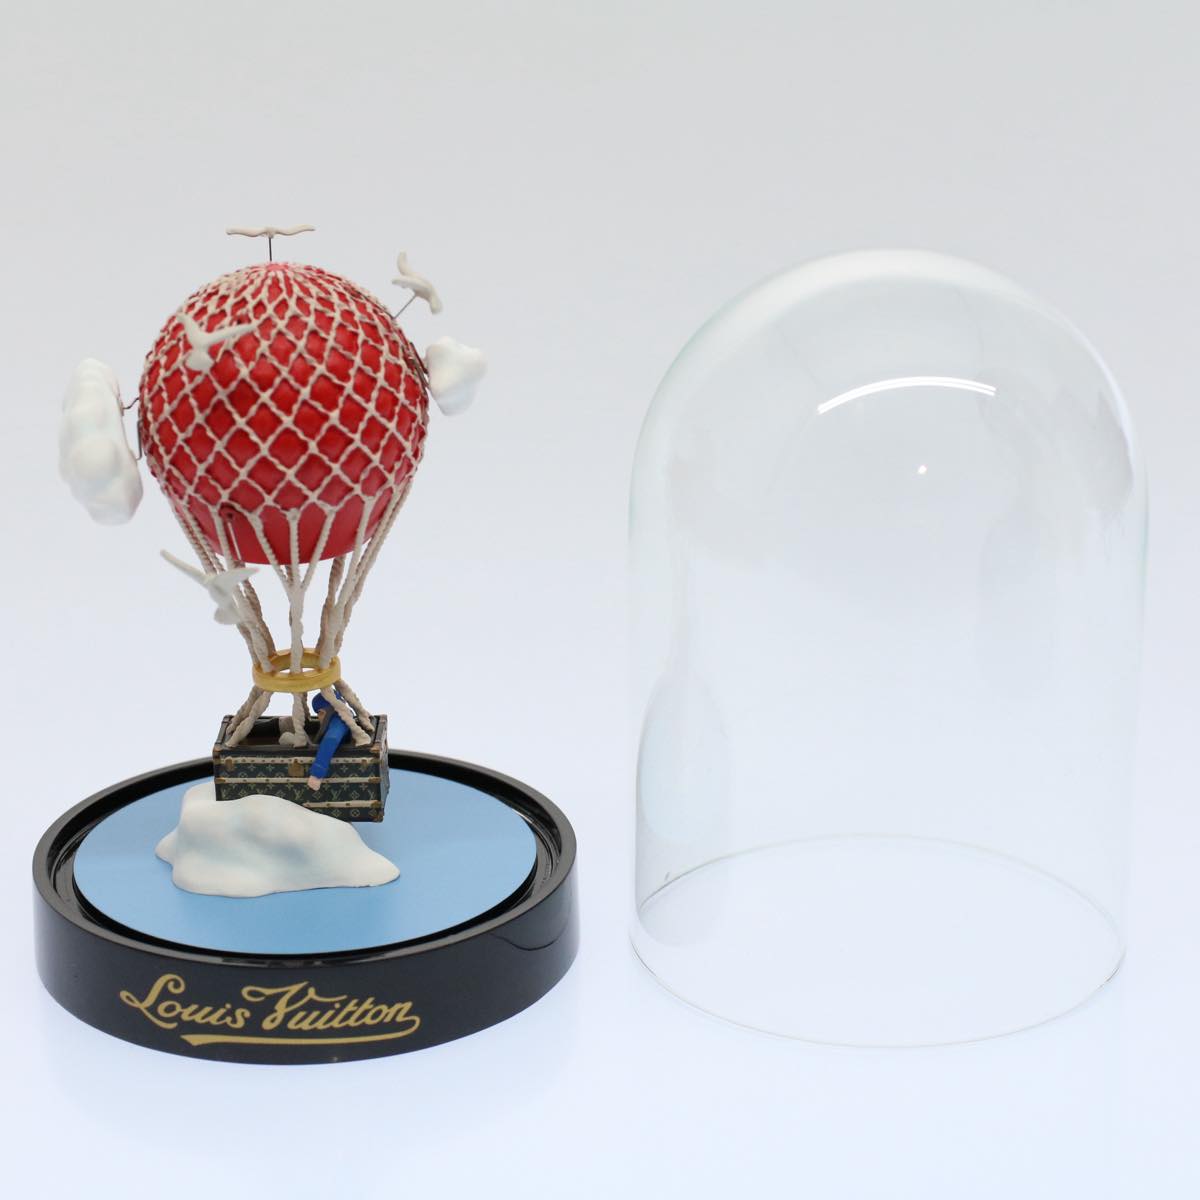 LOUIS VUITTON Snow Globe Balloon VIP Only Clear Red LV Auth 59148A